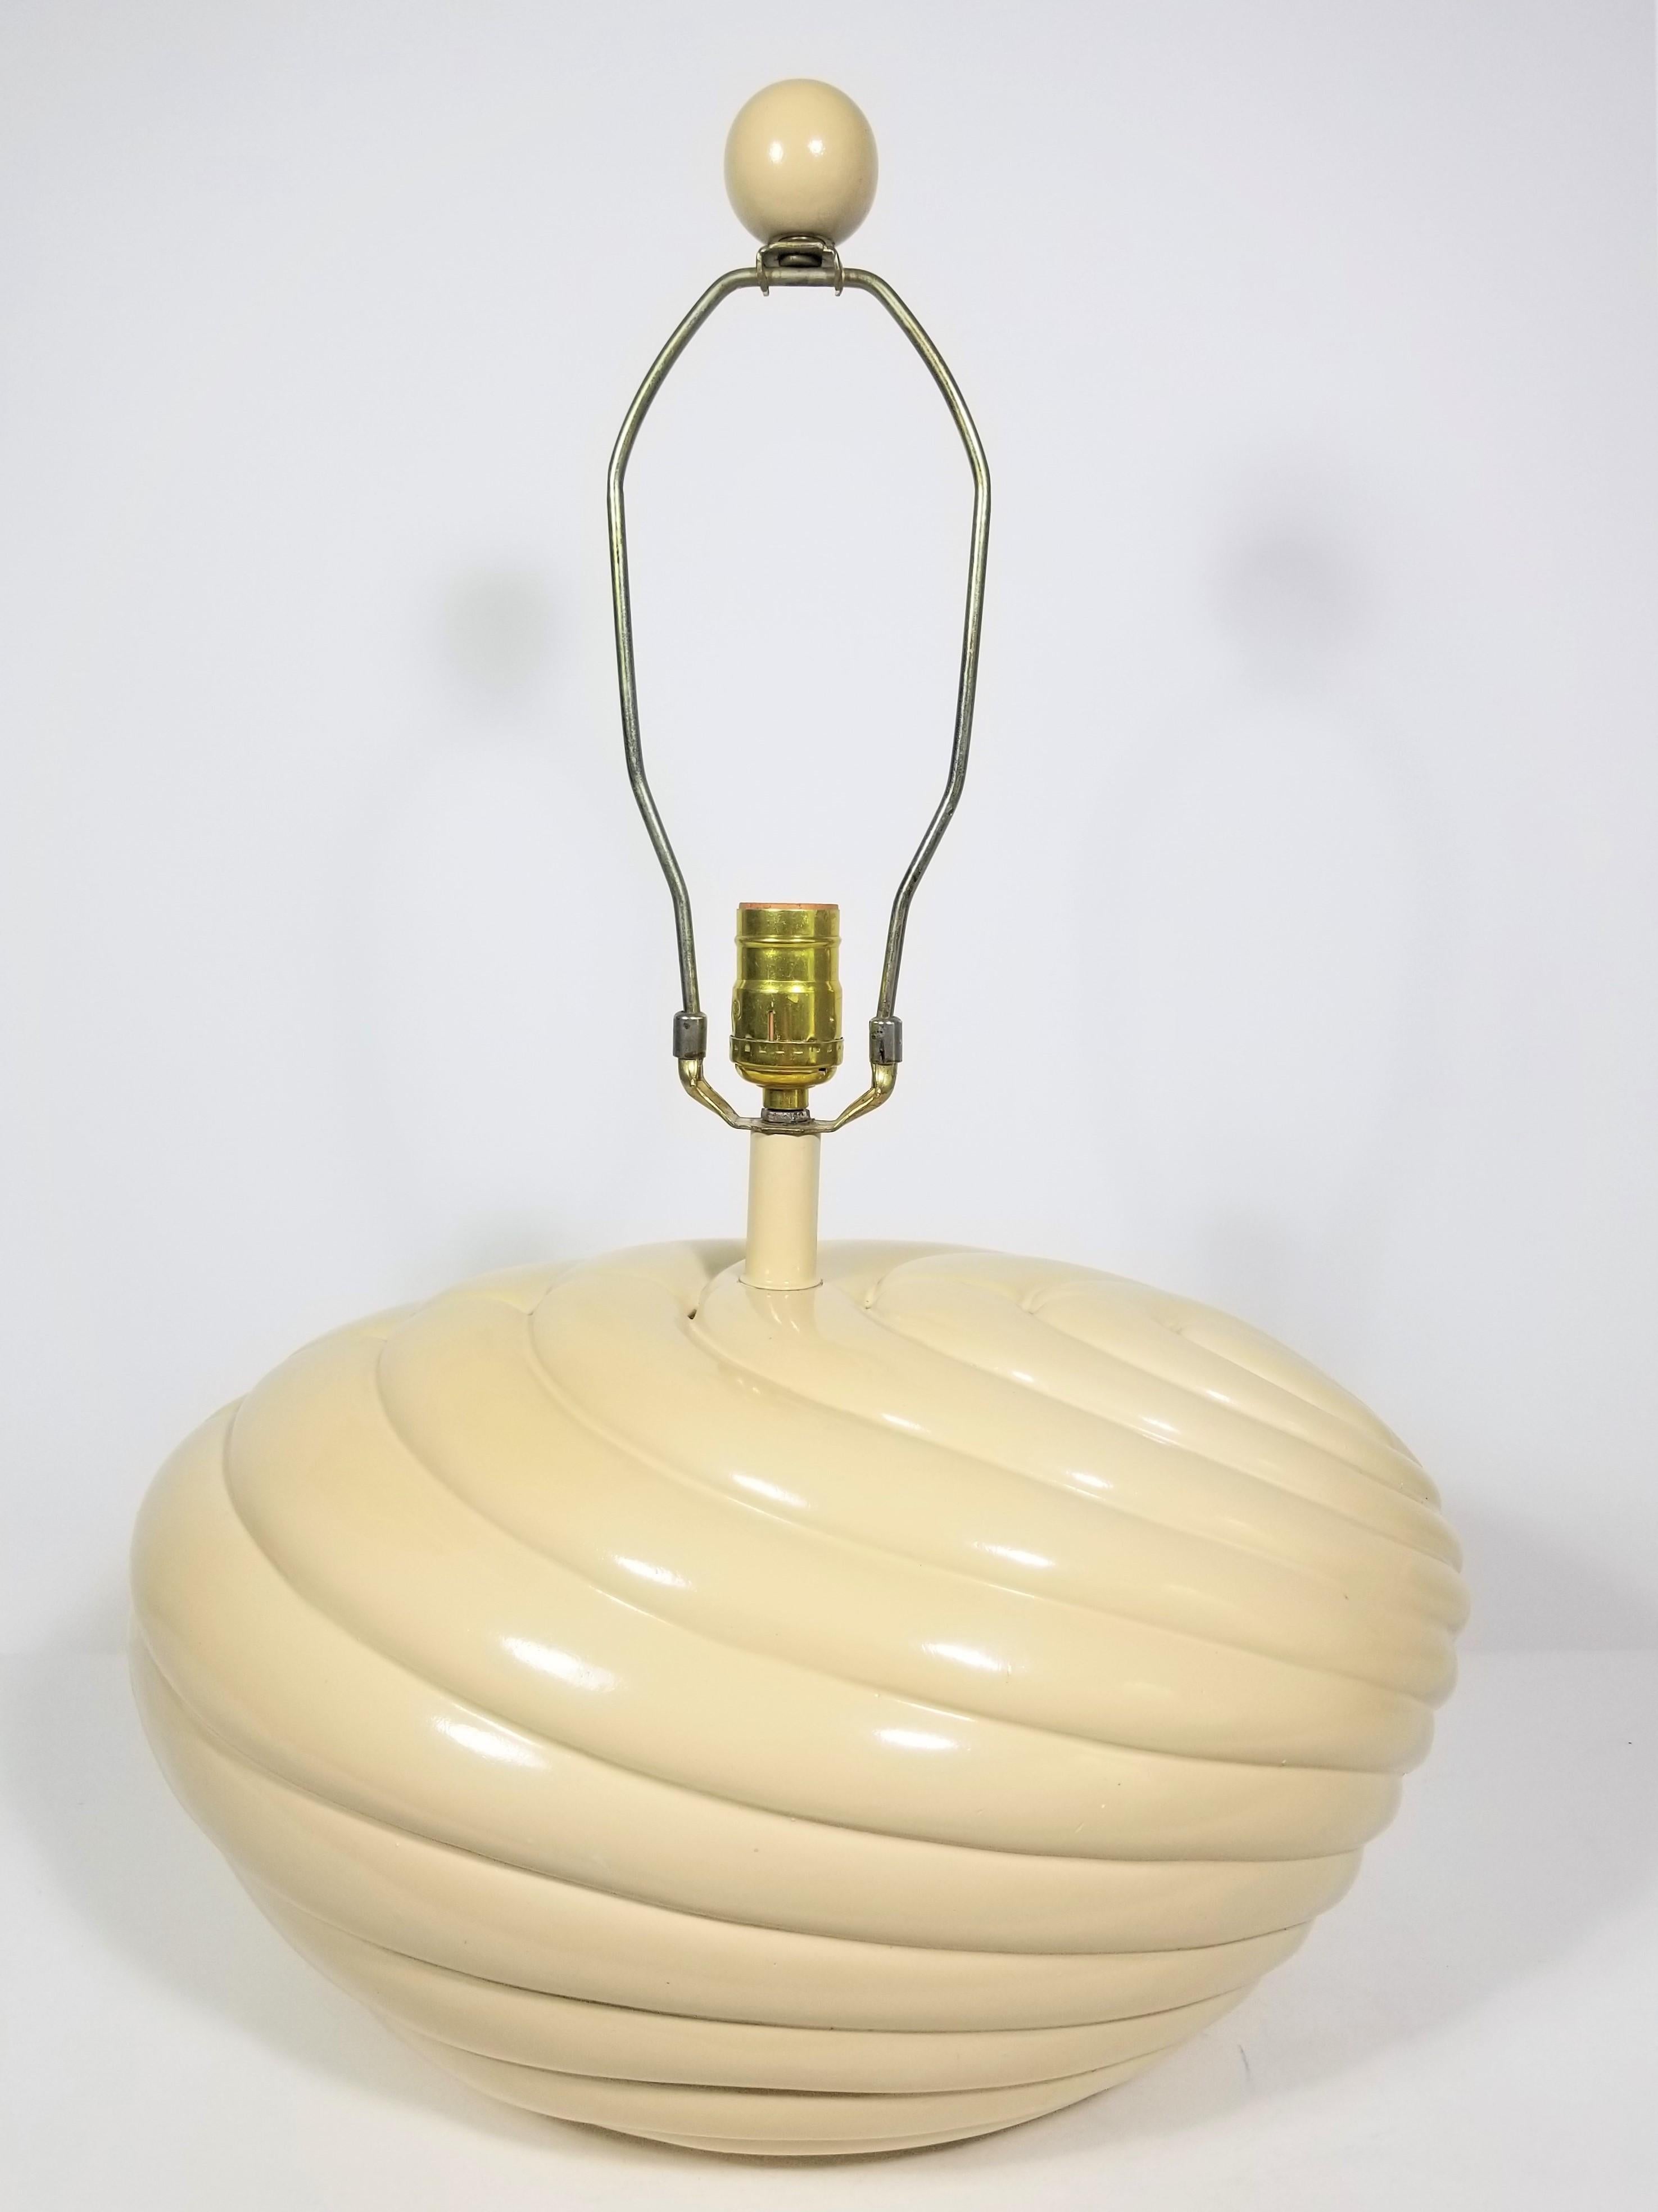 1970s-1980s midcentury bulbous base lamp. Off white color. Shell inspired design. Matching wooden round ball finial. Heavy weight. 
Lamp Measurements:
Height to top of finial: 23.0 inches
Height to top of socket: 14.0 inches
Height to top of lamp